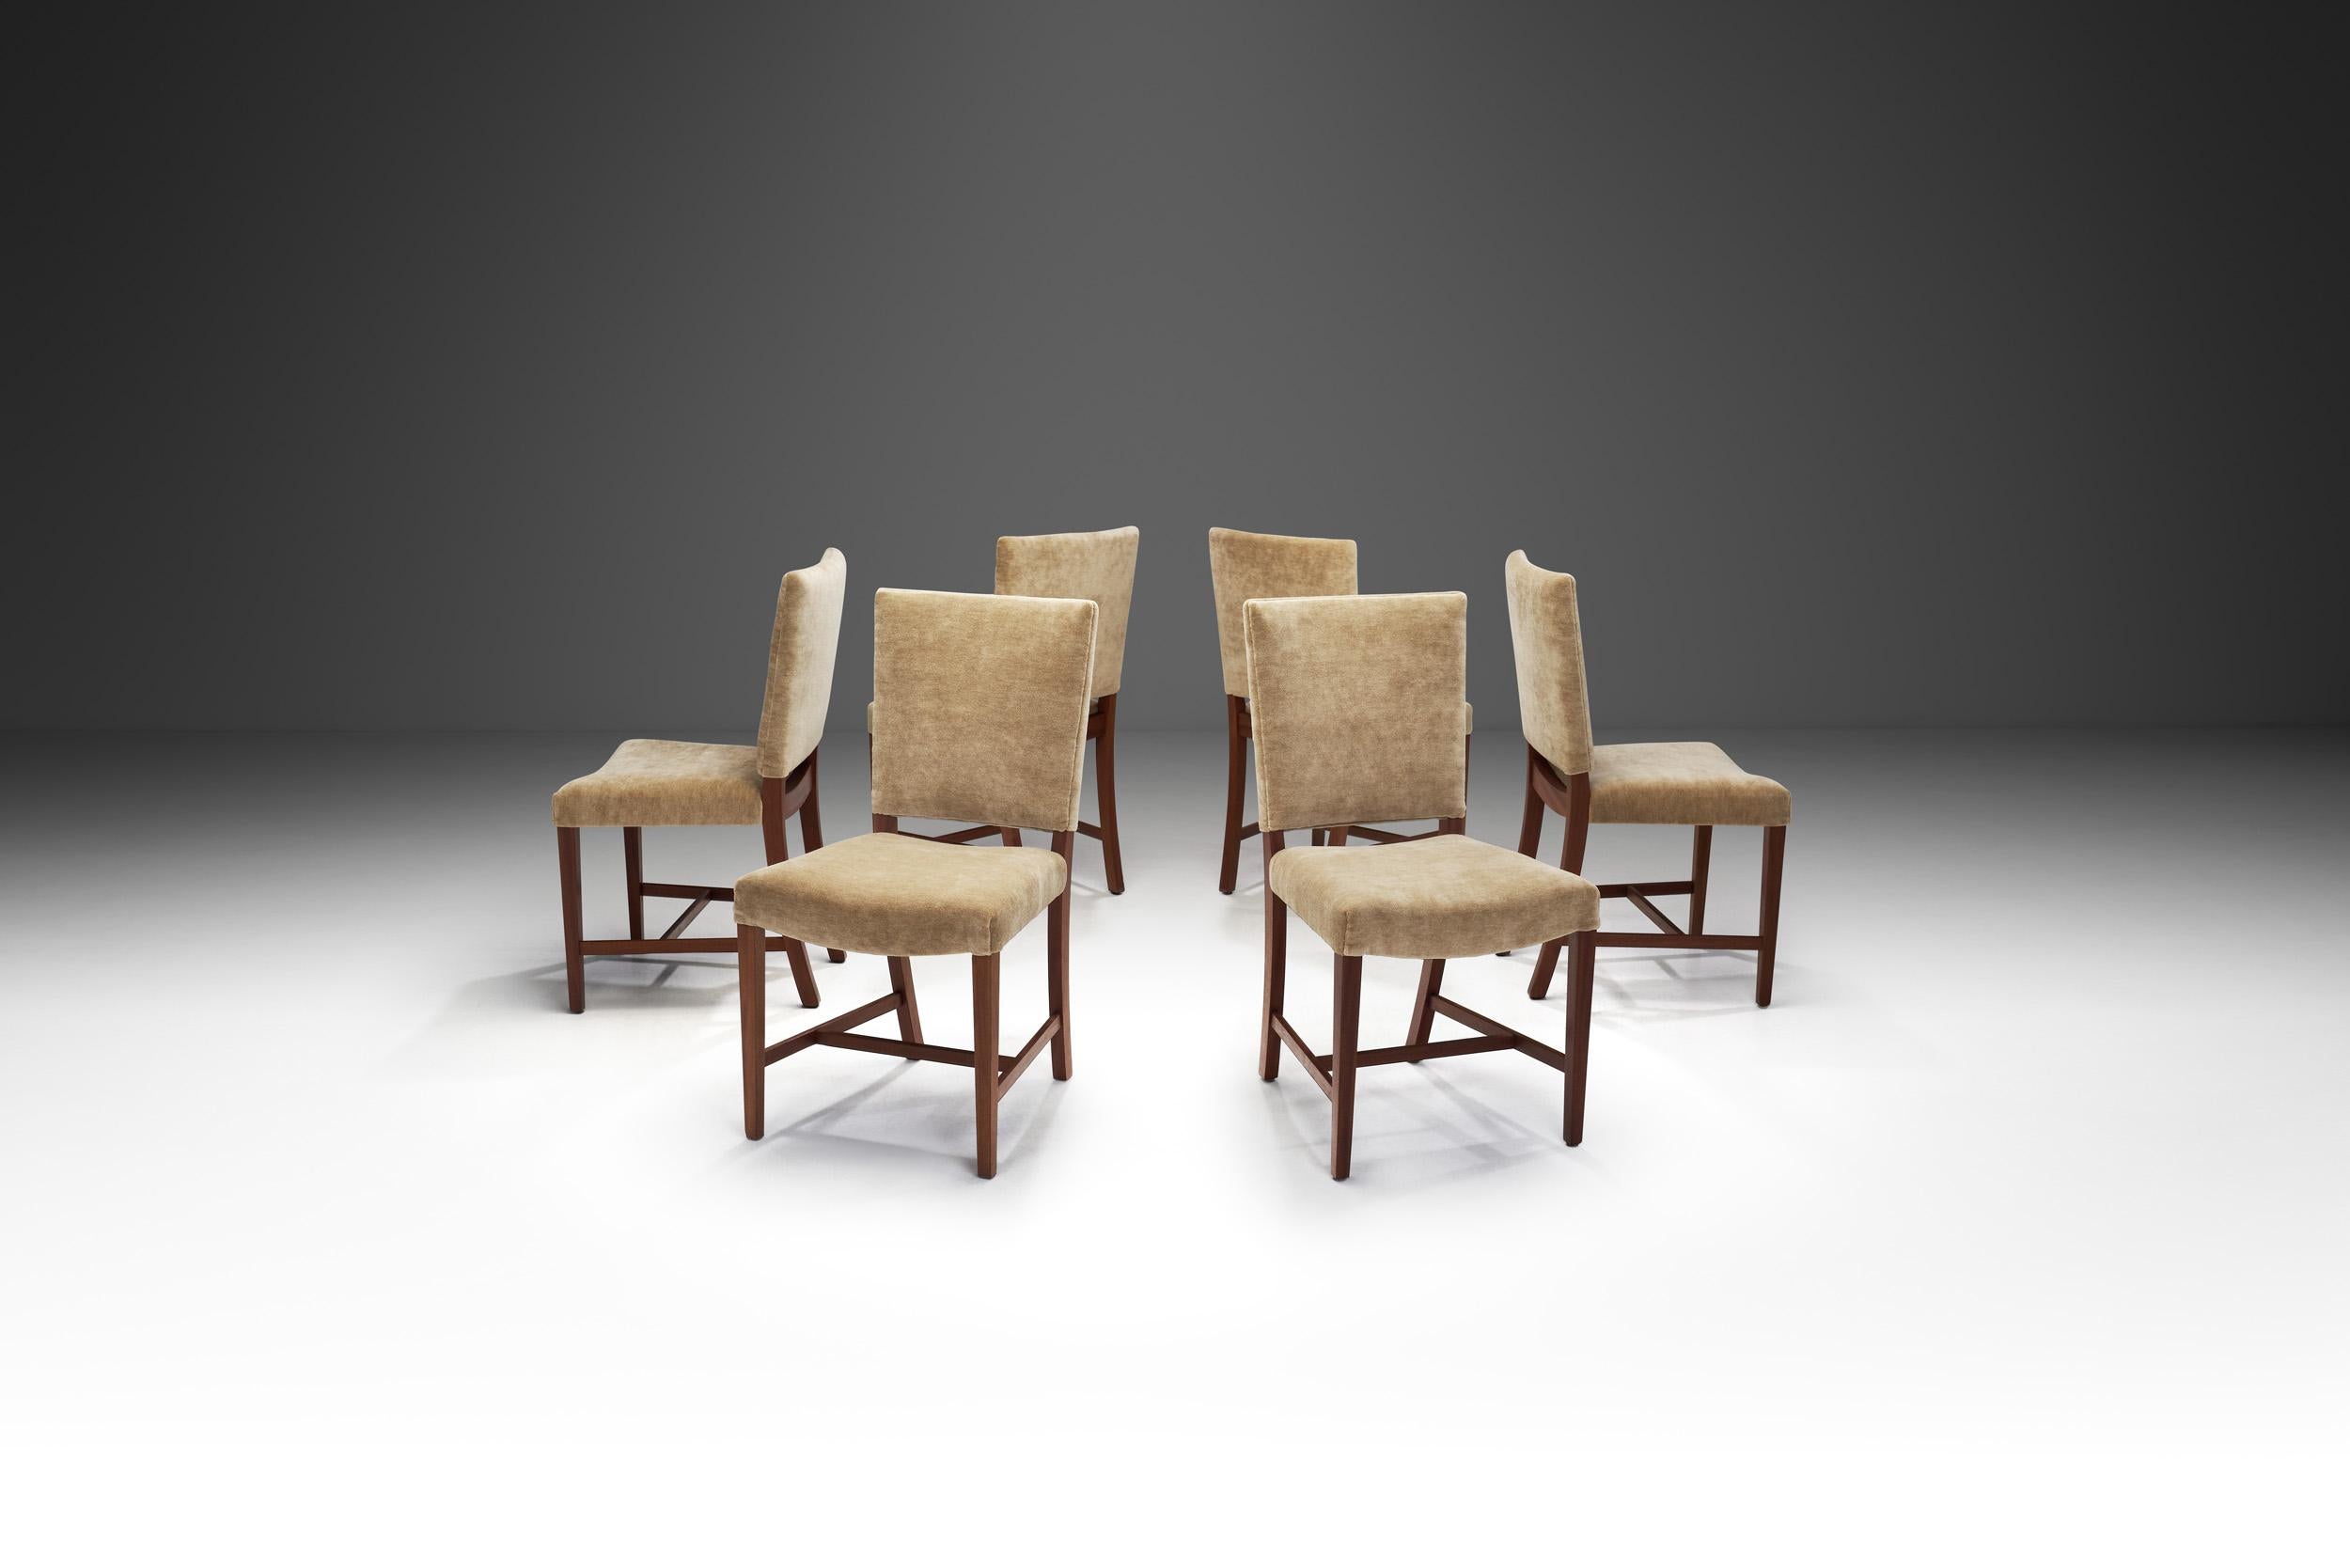 Danish Set of Six Exotic Wood Dining Chairs by Jacob Kjær (attr.), Denmark 1940s For Sale